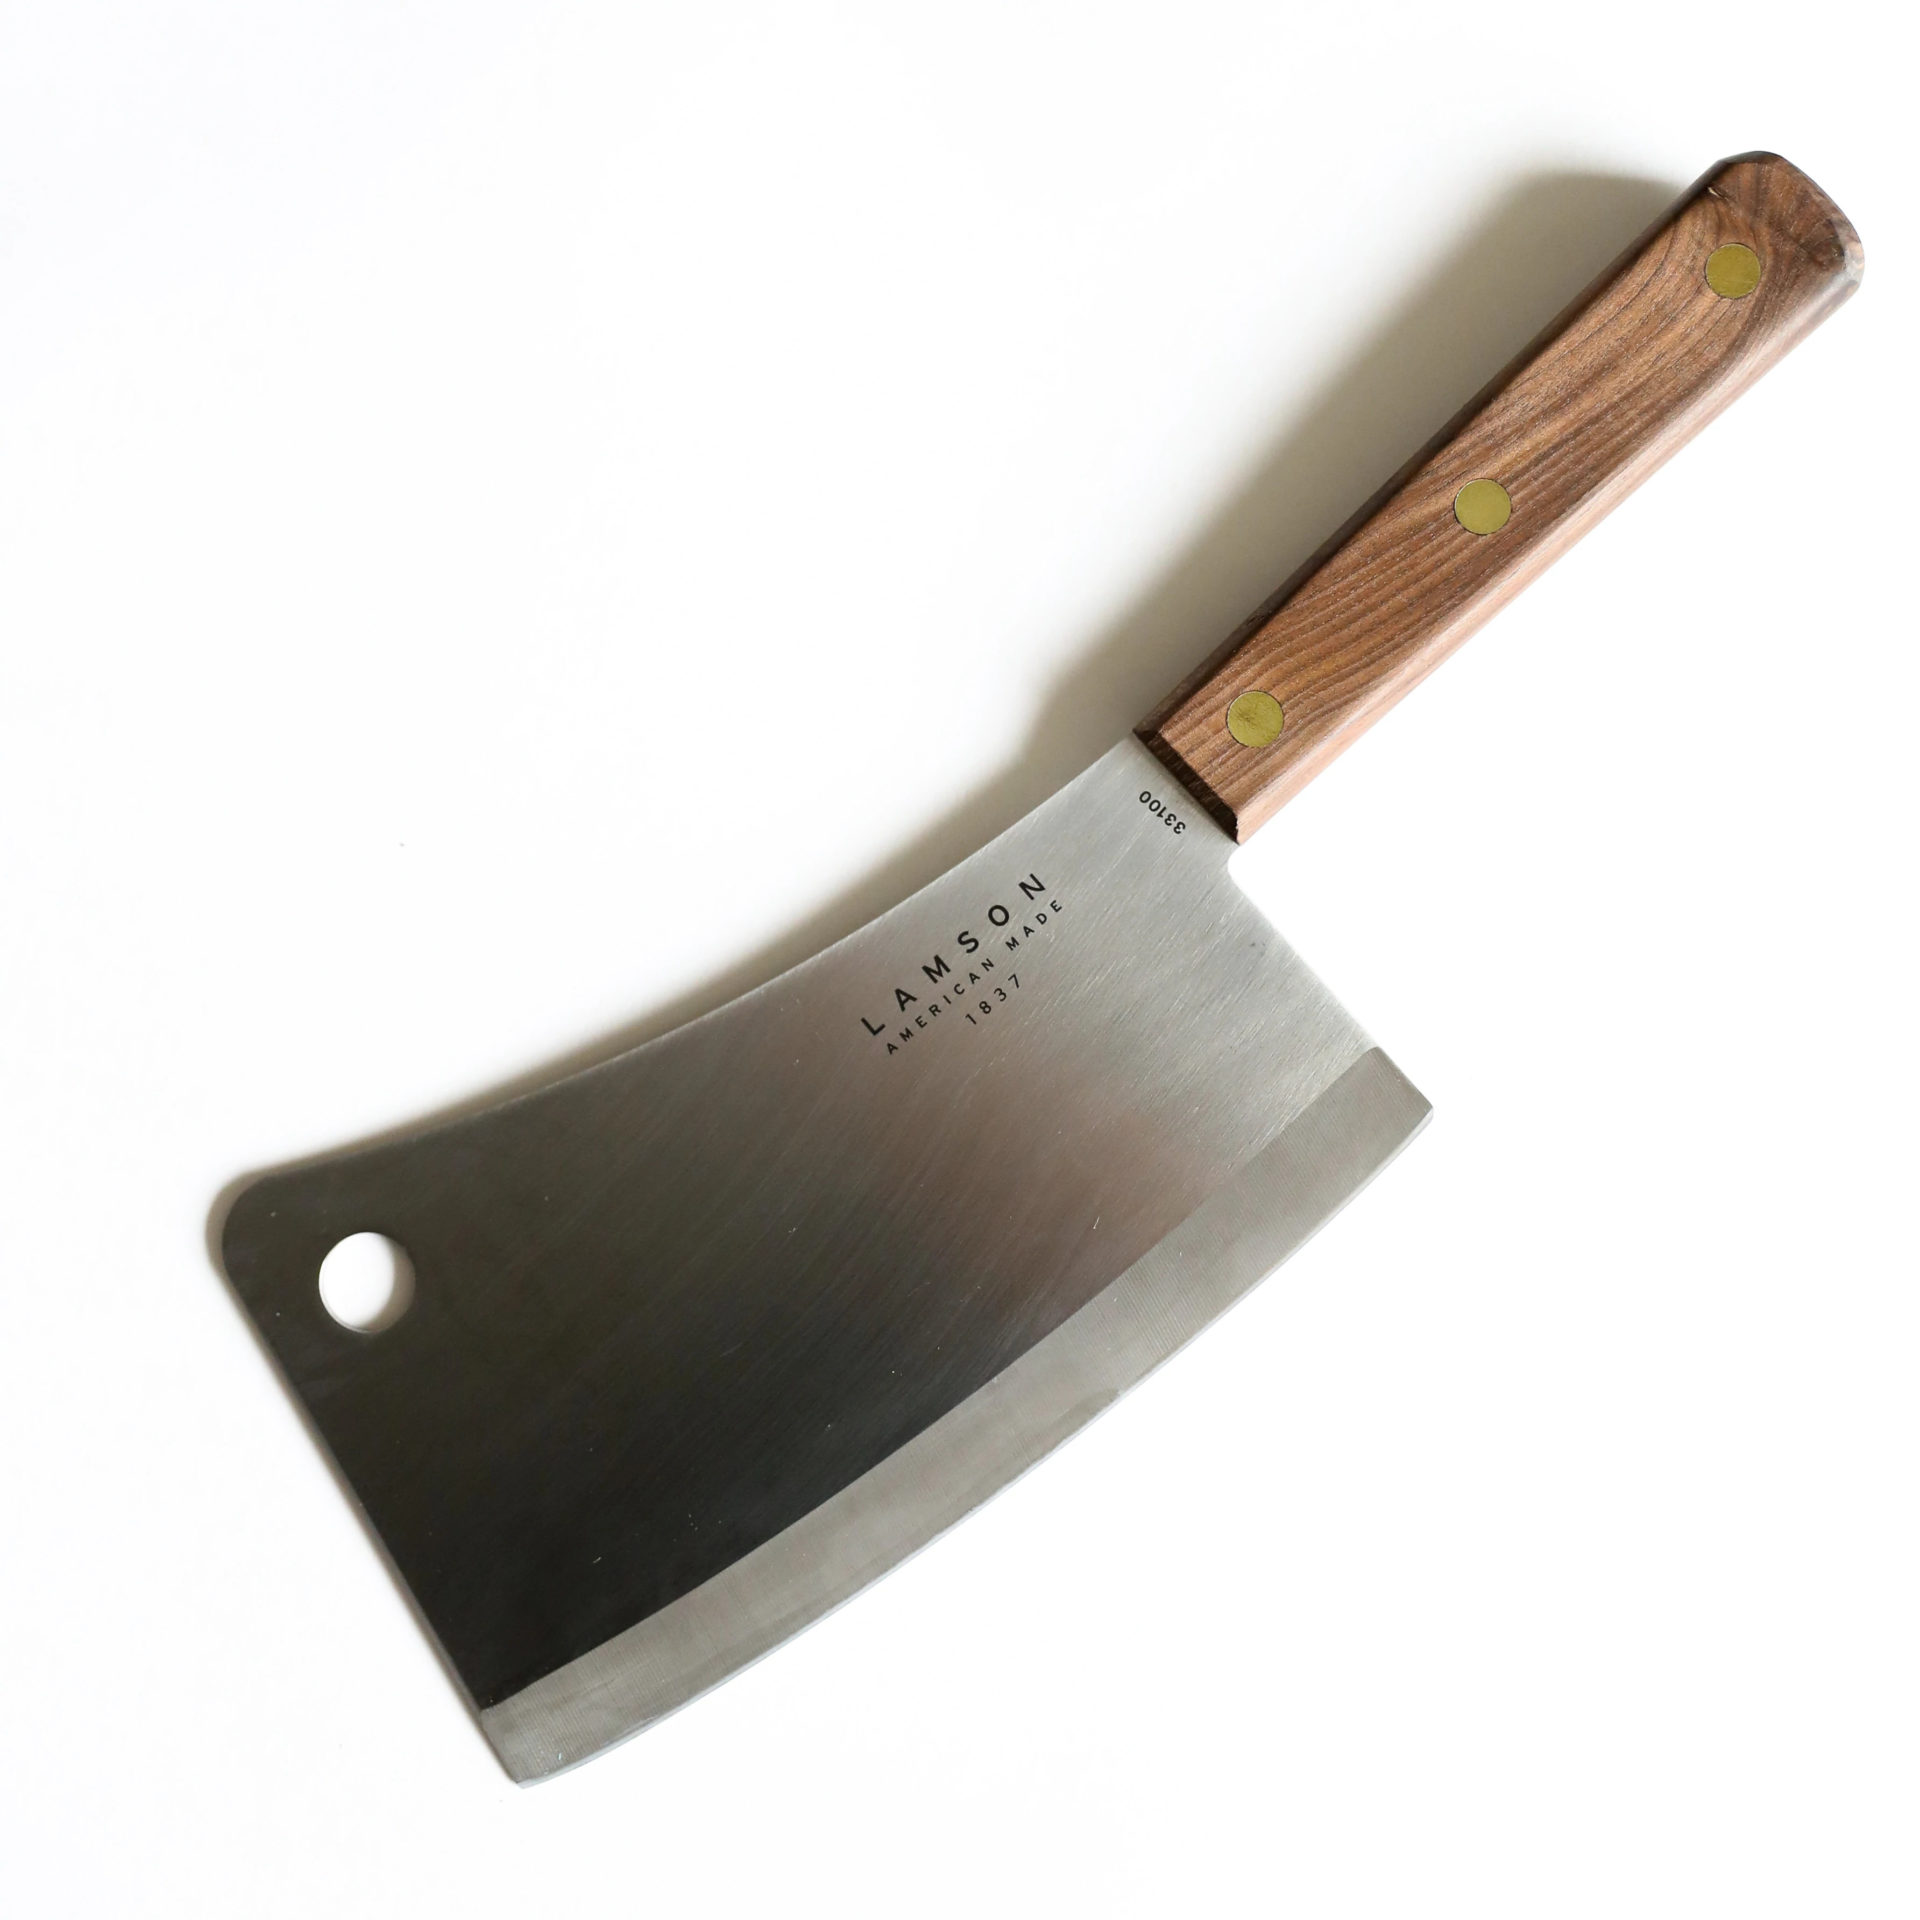 How to Use a Meat Cleaver